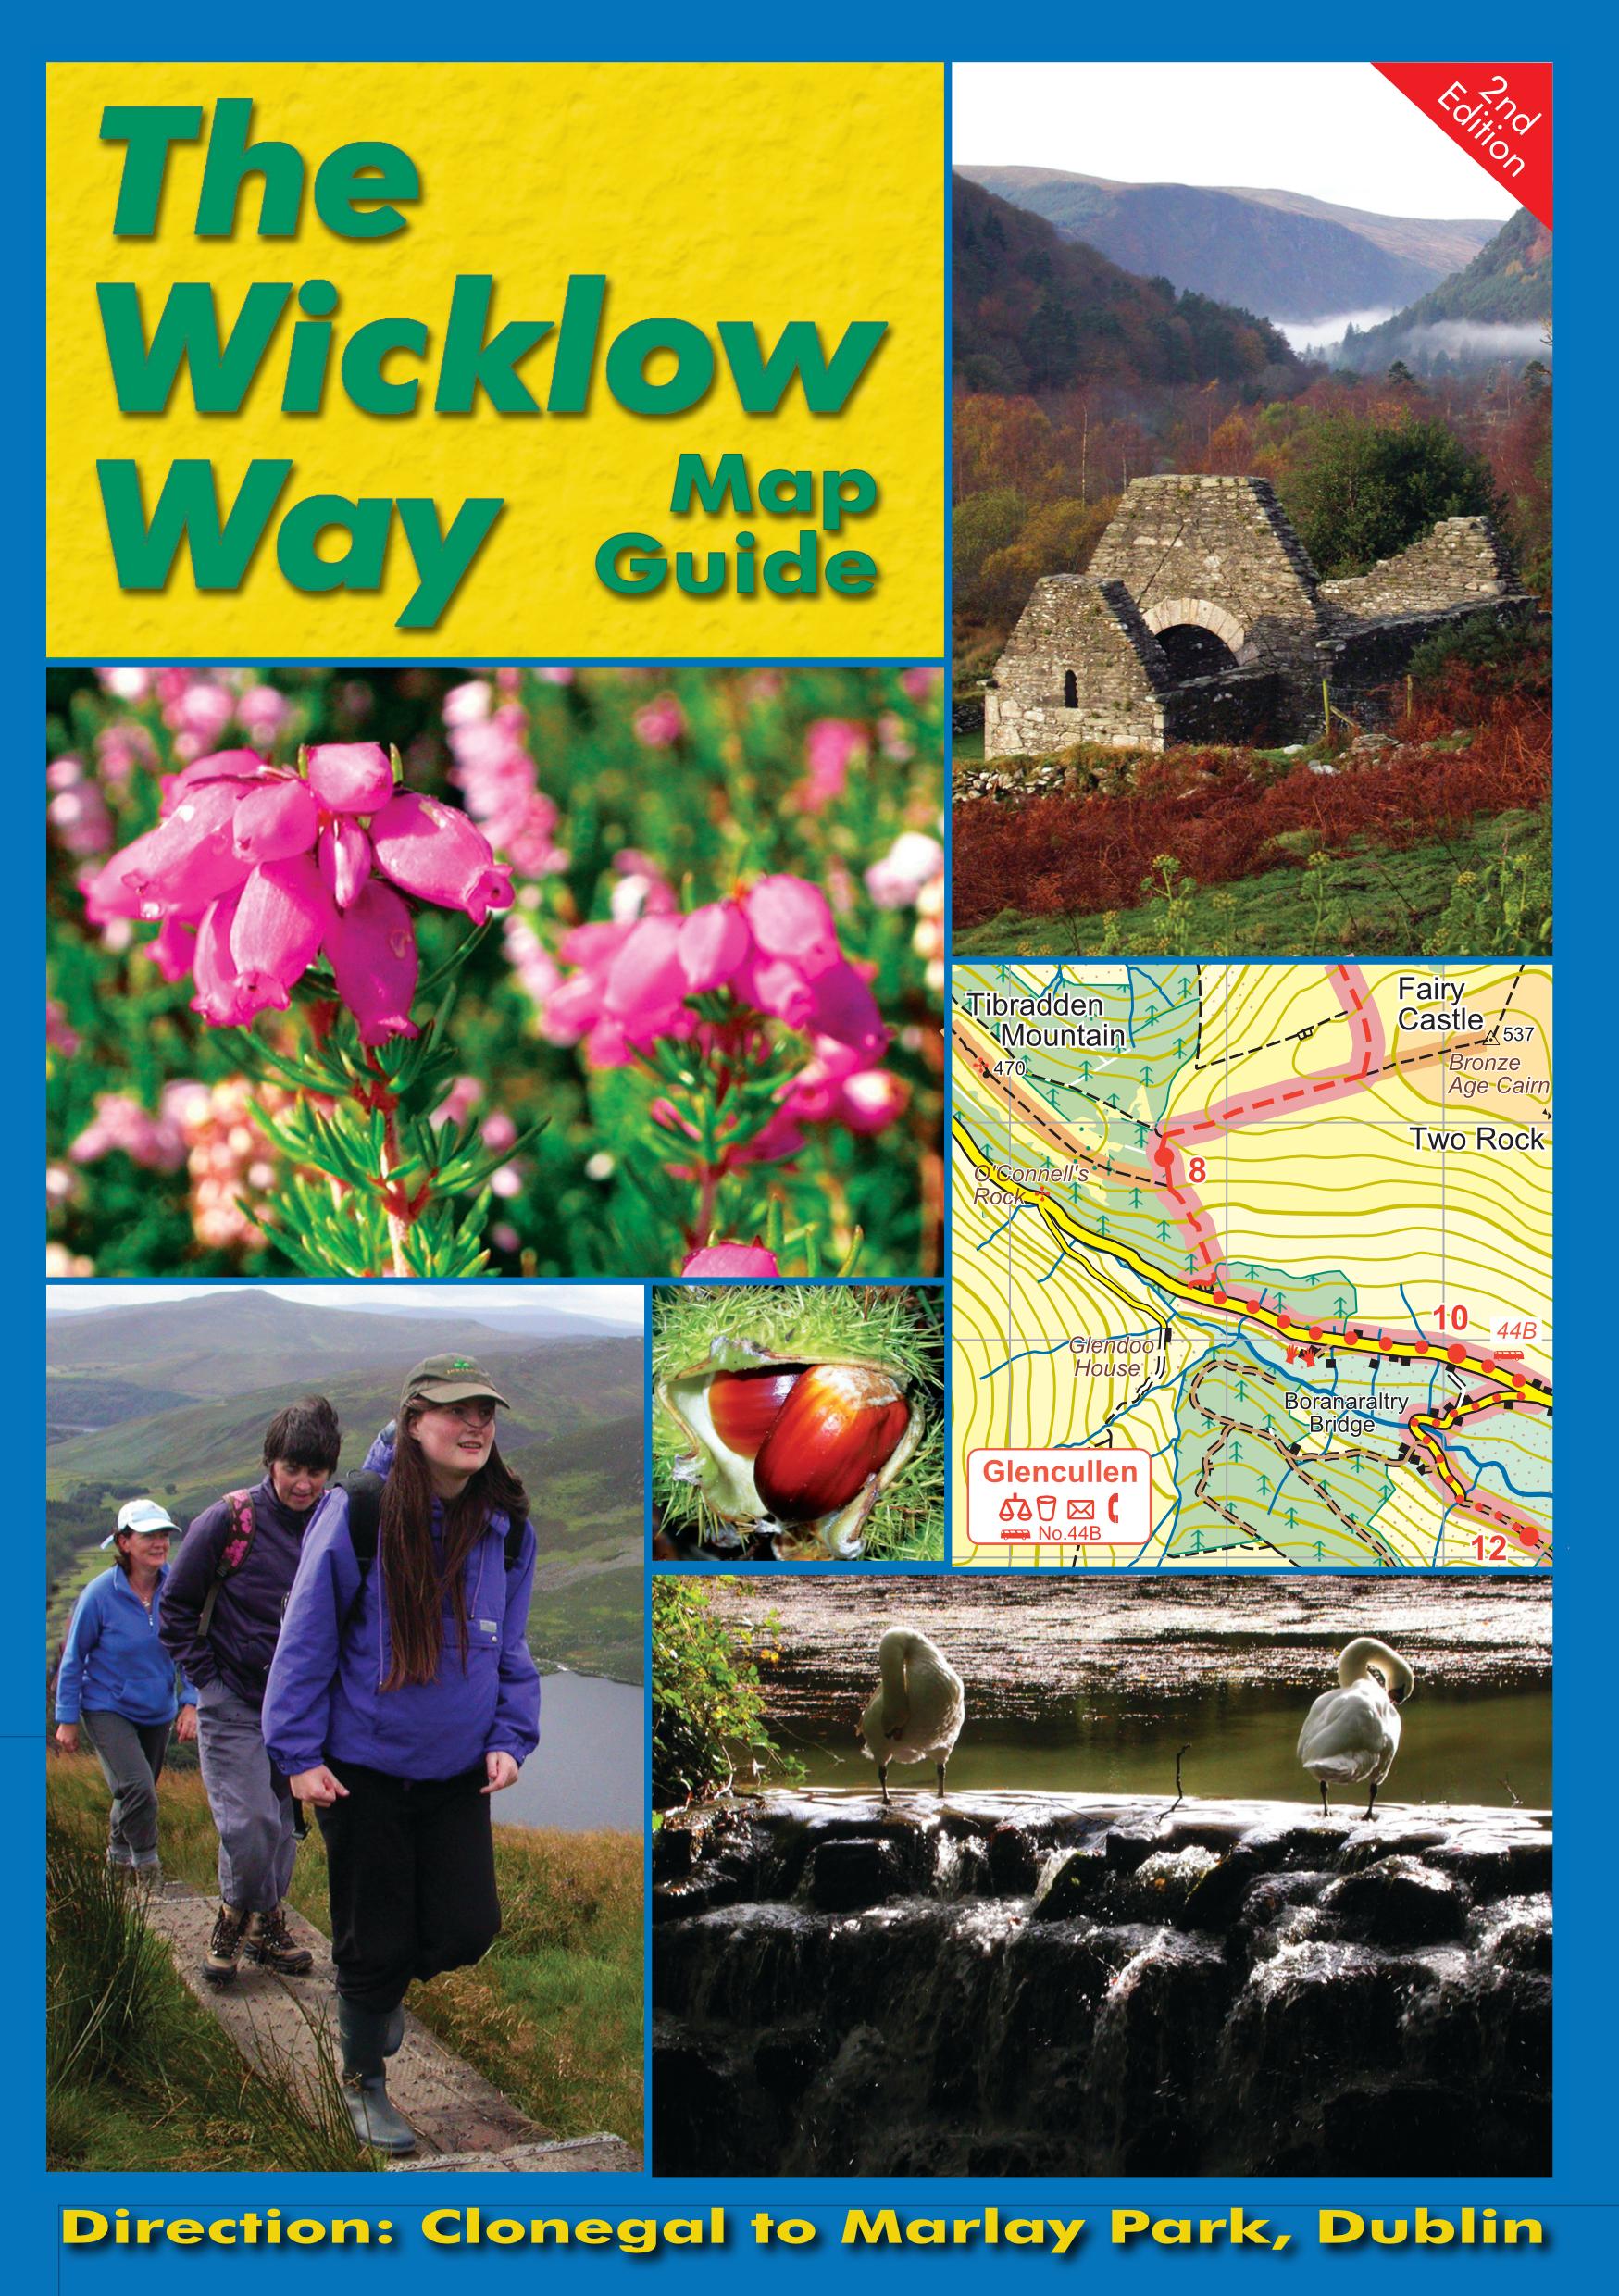 The Wicklow Way Map Guide leading from Clonegal to Marlay Park, Dublin.